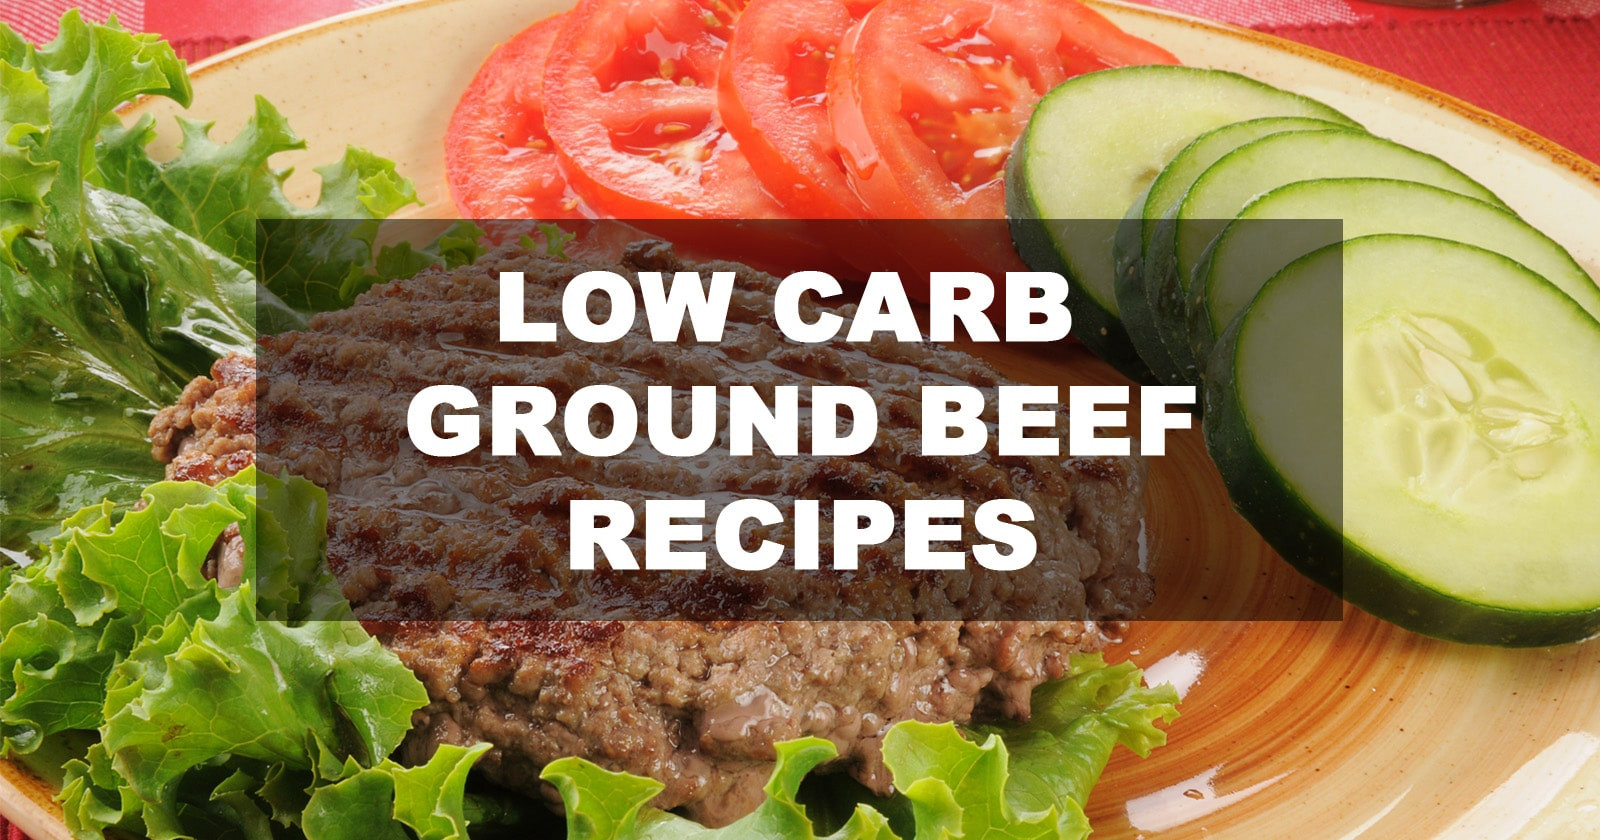 Low Calorie Recipes With Ground Beef
 Best Low Carb Ground Beef Recipes October 2018